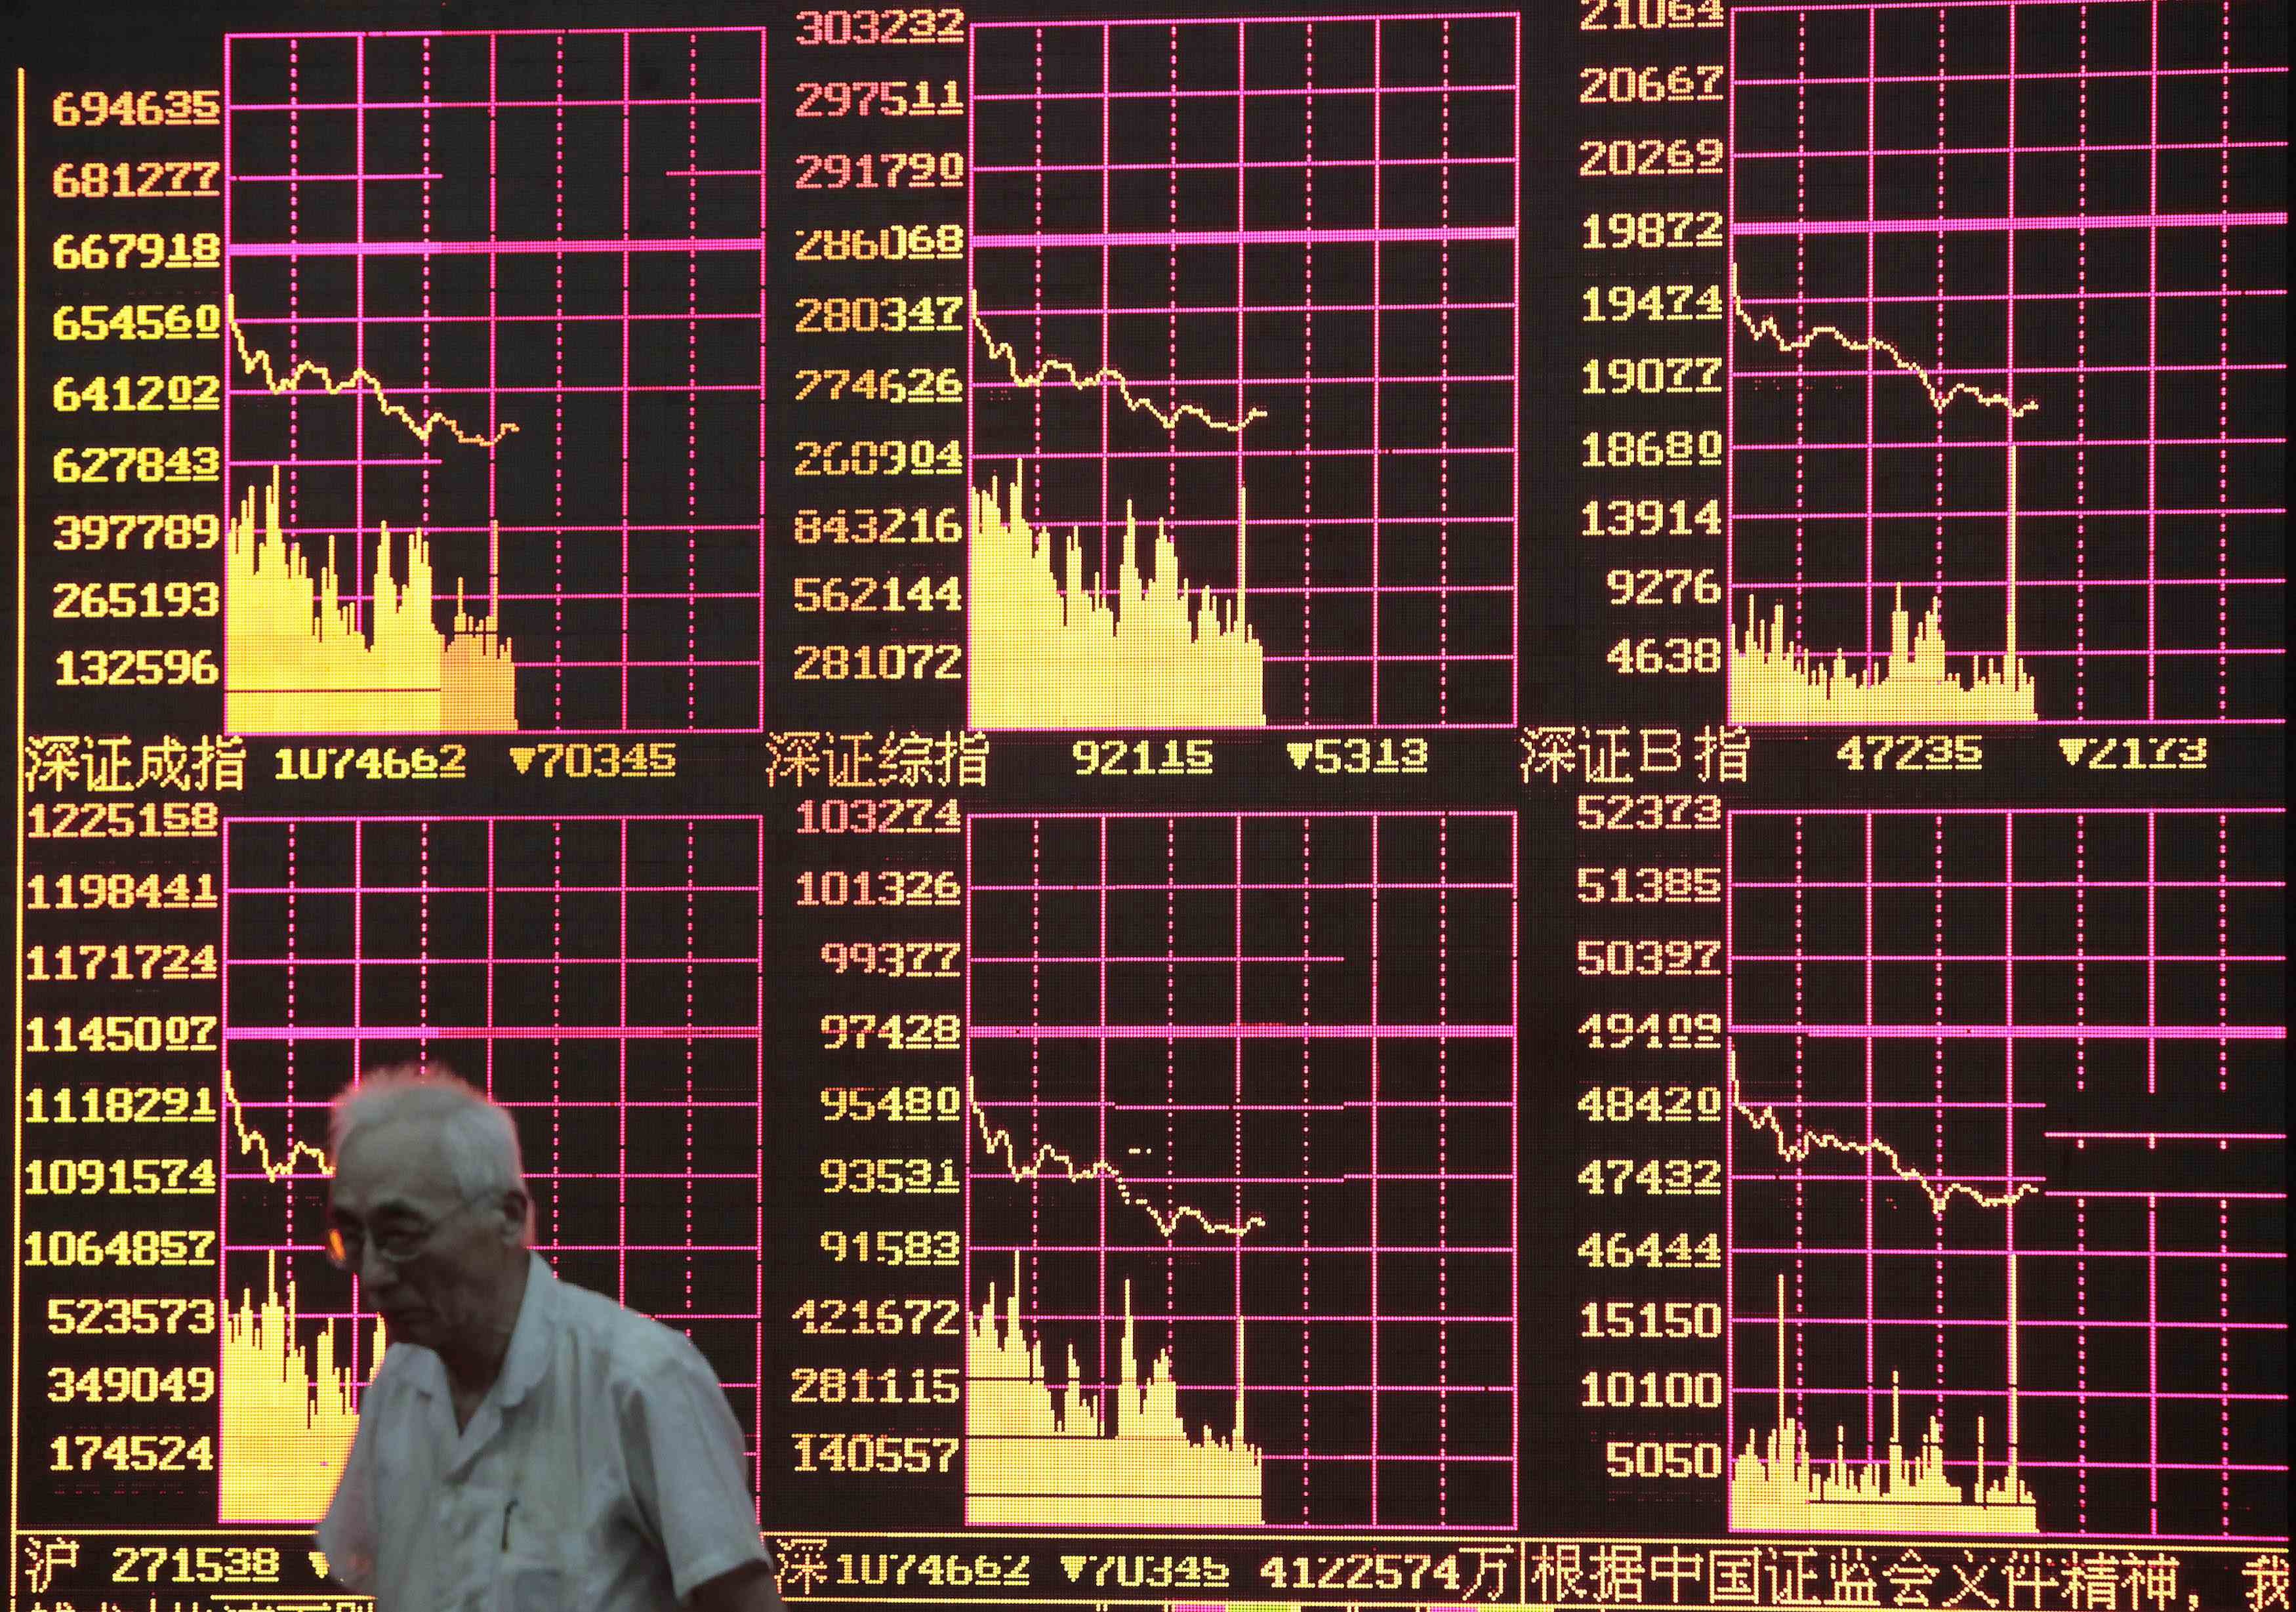 Investors say ChiNext-listed companies are overvalued and do not reflect their earning fundamentals. Photo: Reuters